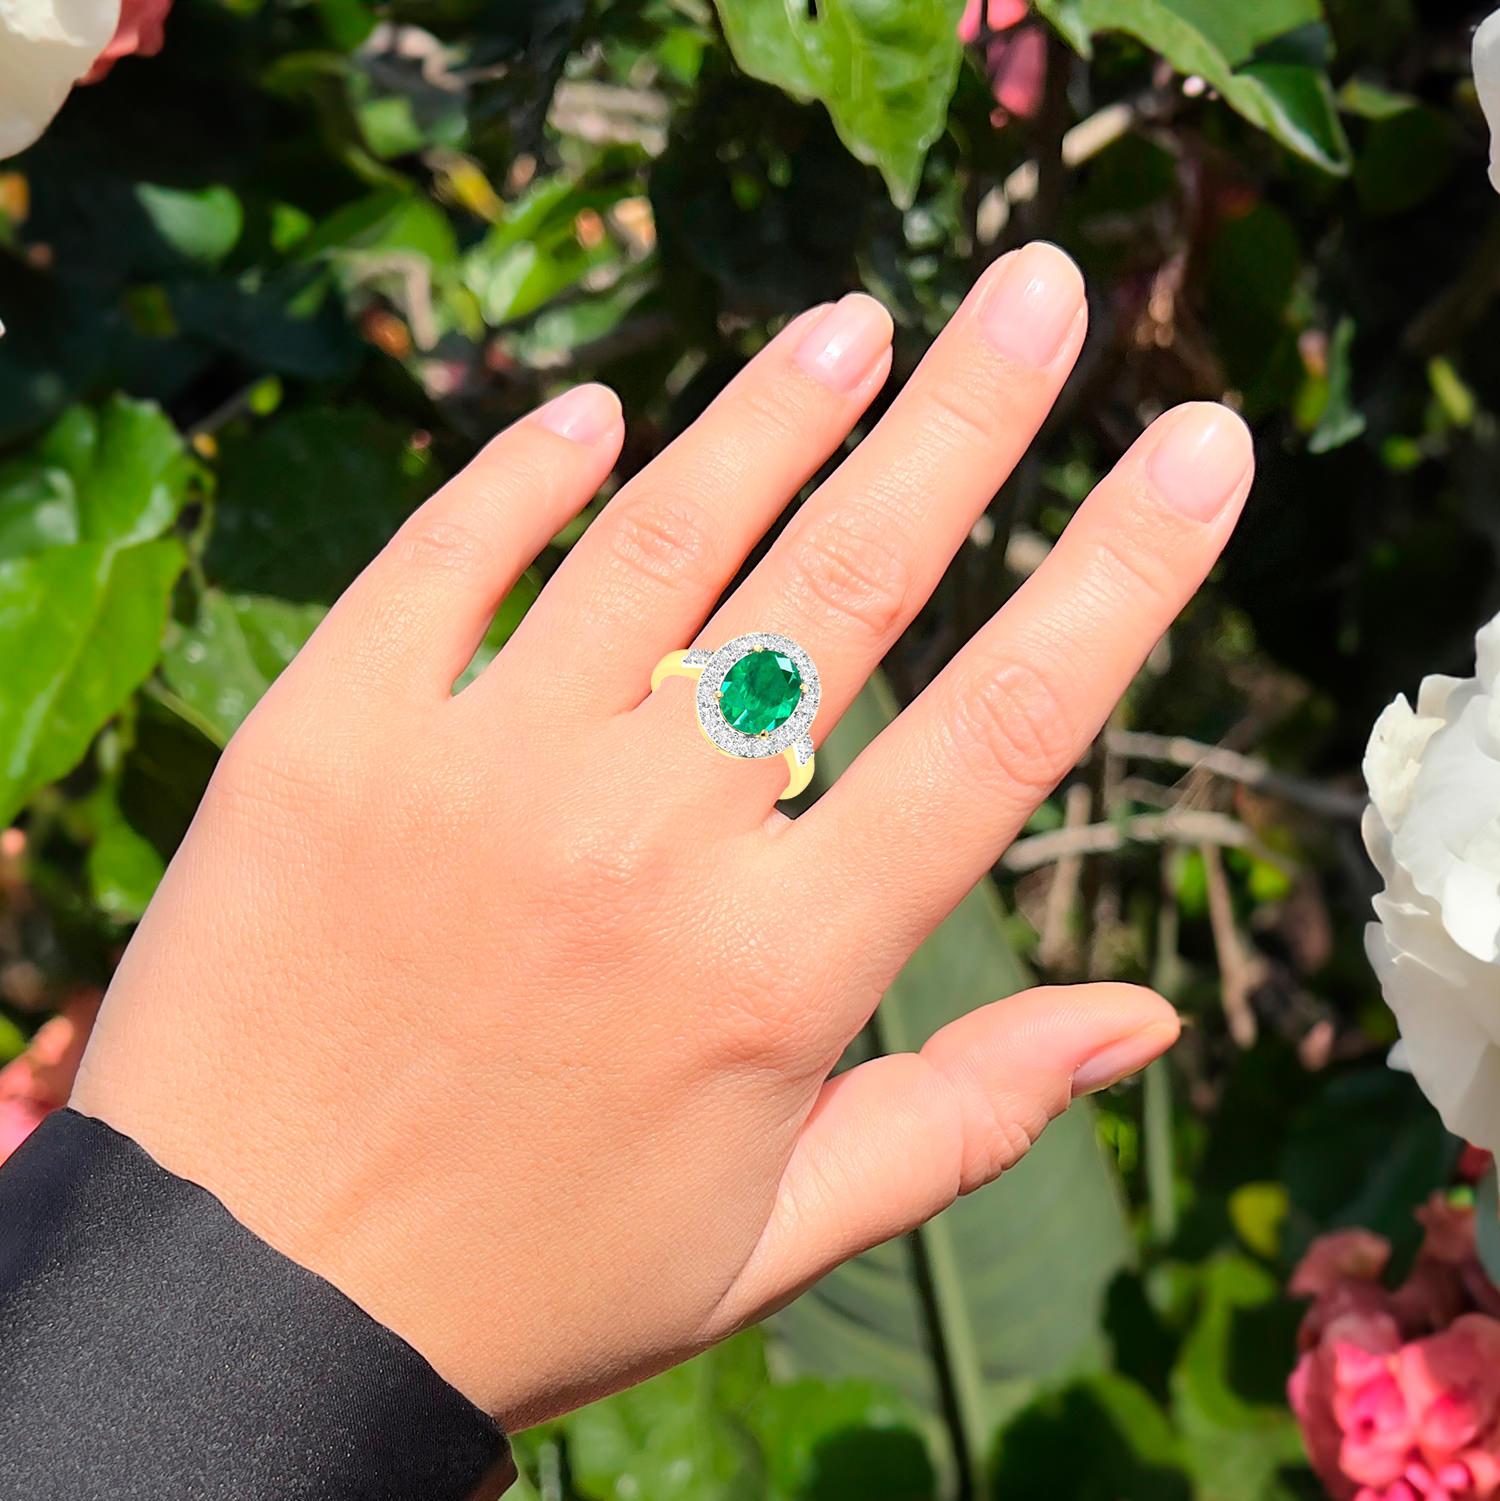 Oval Cut Zambian Emerald Ring With Diamonds 3.04 Carats 14K Yellow Gold For Sale